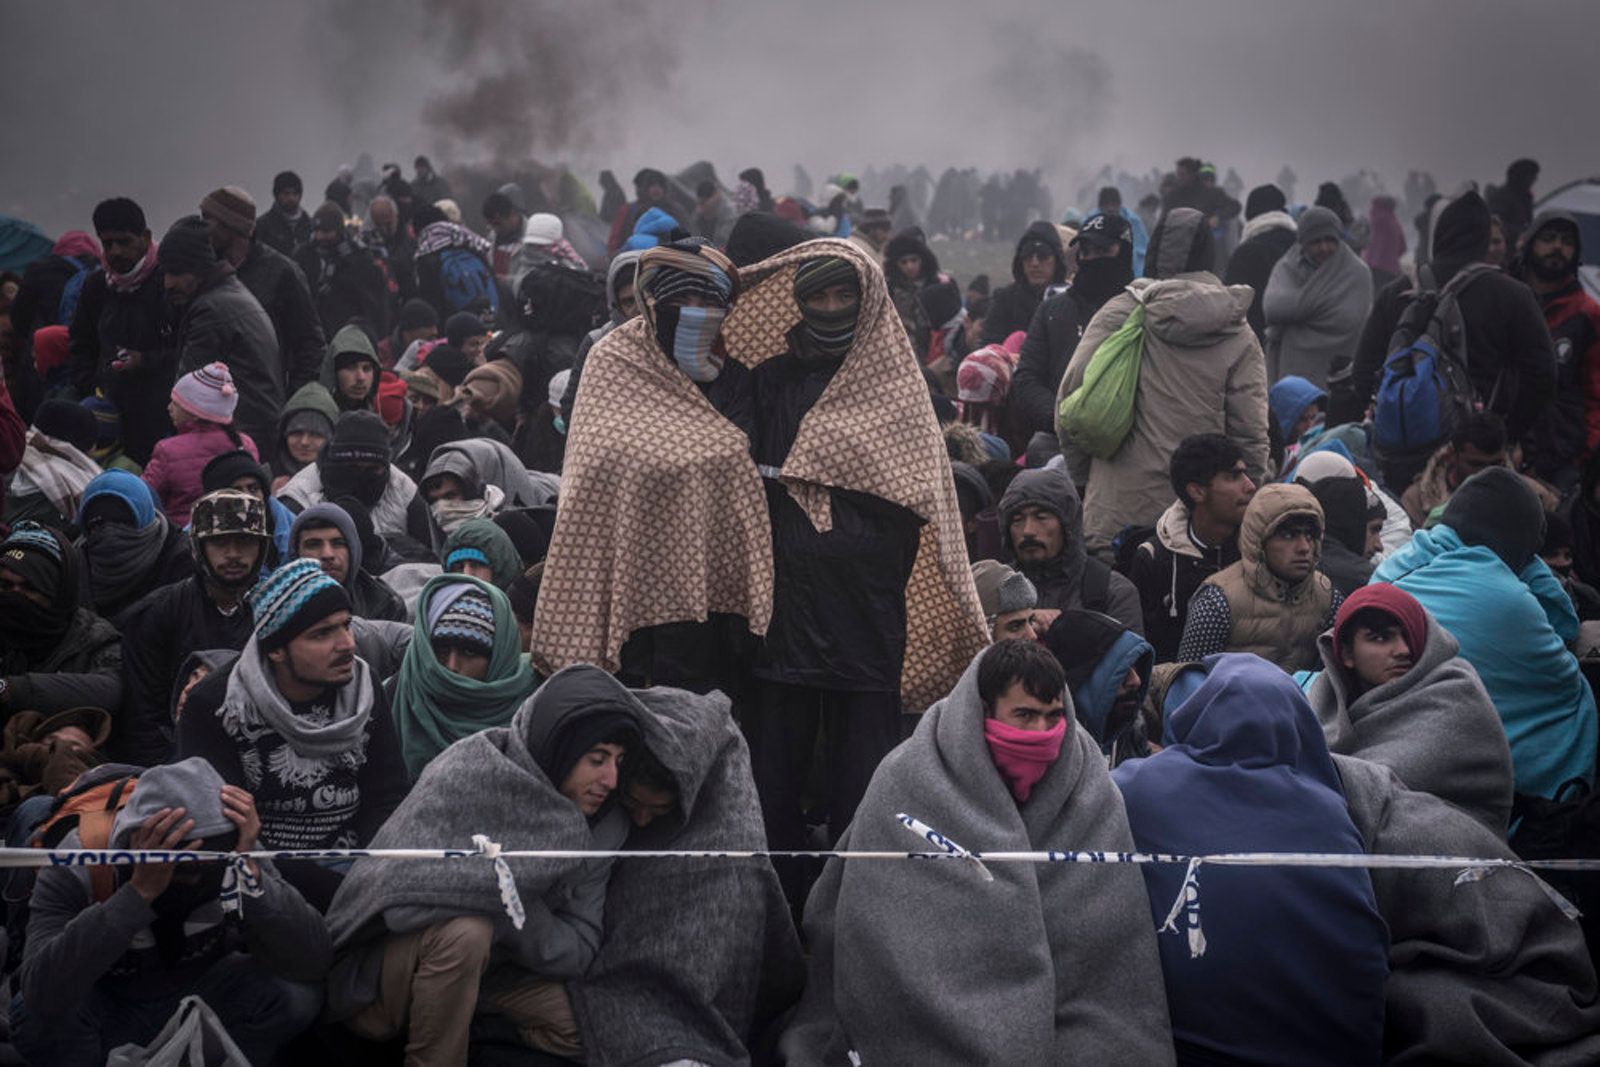 © Sergey Ponomarev - Migrants wait to be escorted by Slovenian riot police to the registration camp outside Dobova, Slovenia.